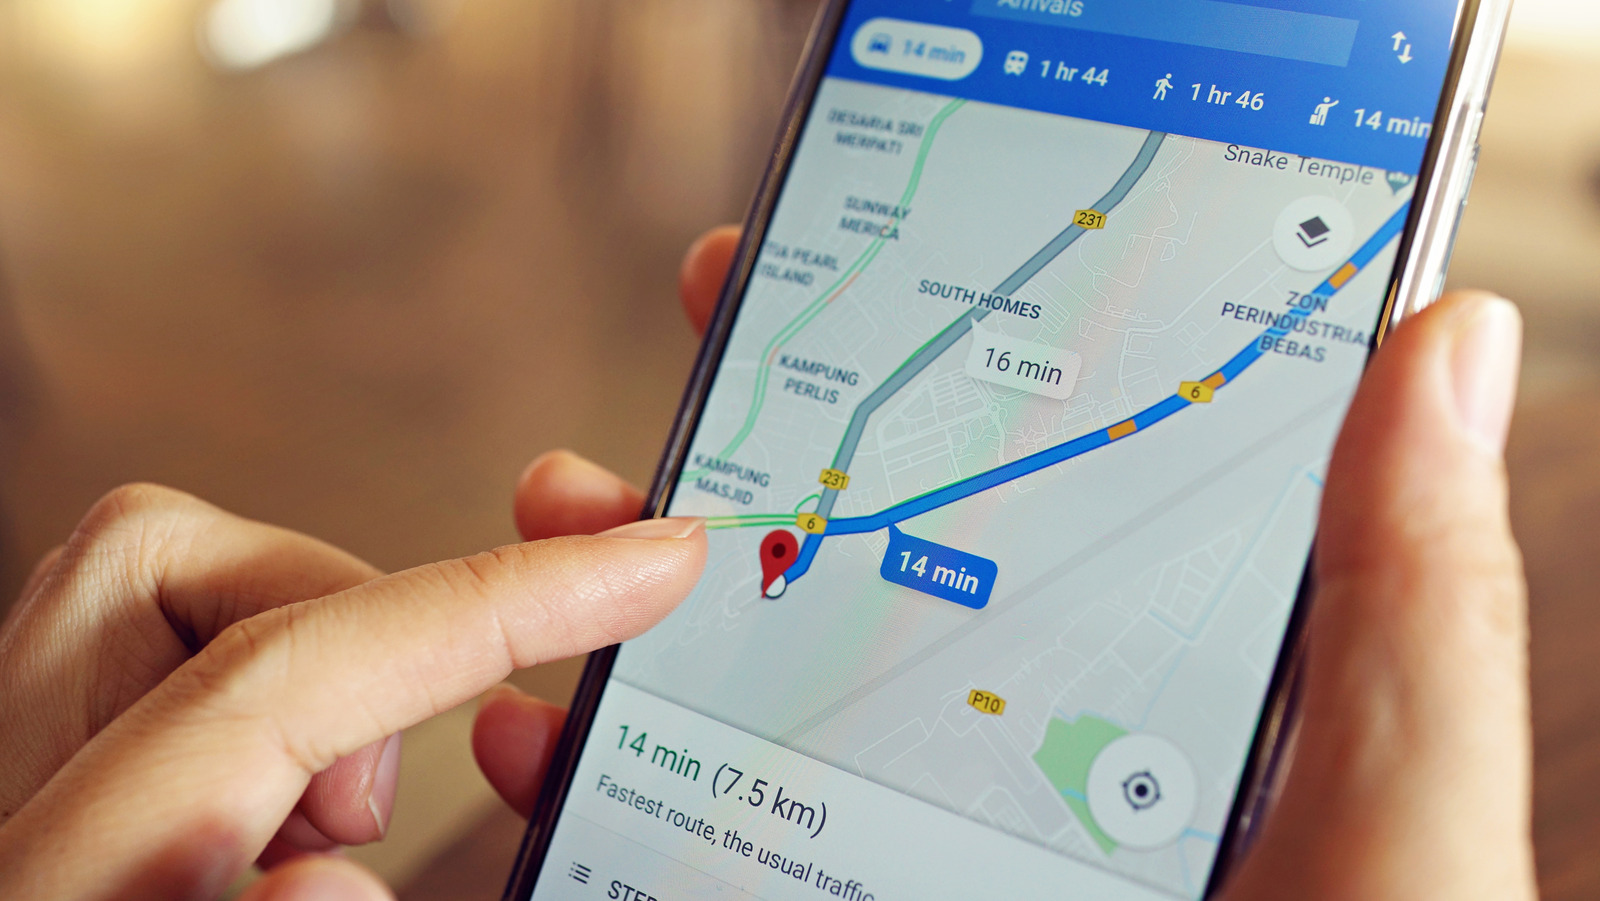 Can you track location on Google phone?